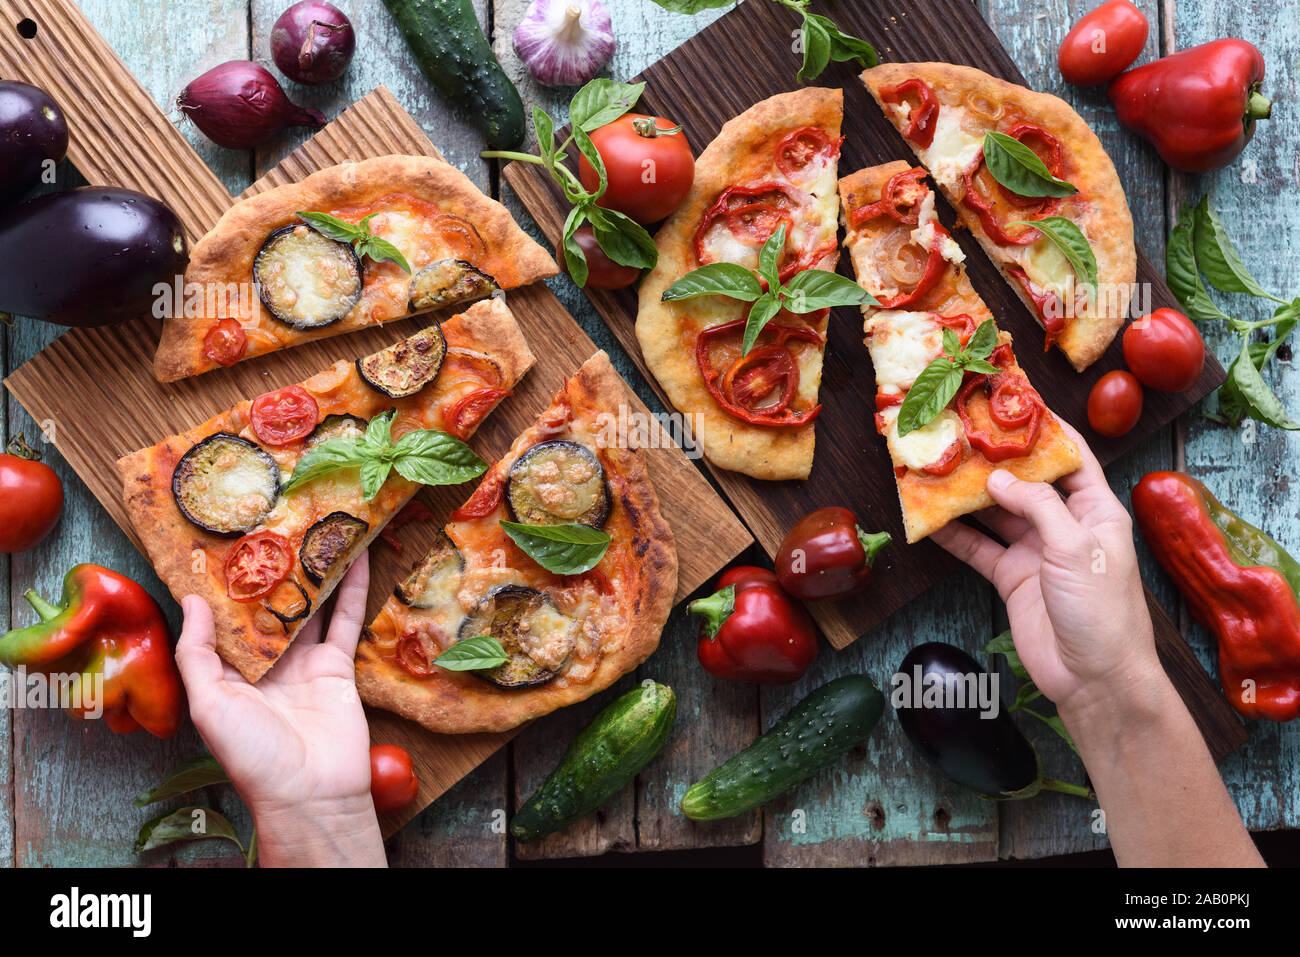 Slender woman hands reaching for healthy vegetarian pizza. Homemade rustic pizzas with aubergines, bell peppers, basil and tomatoes on oak boards with Stock Photo